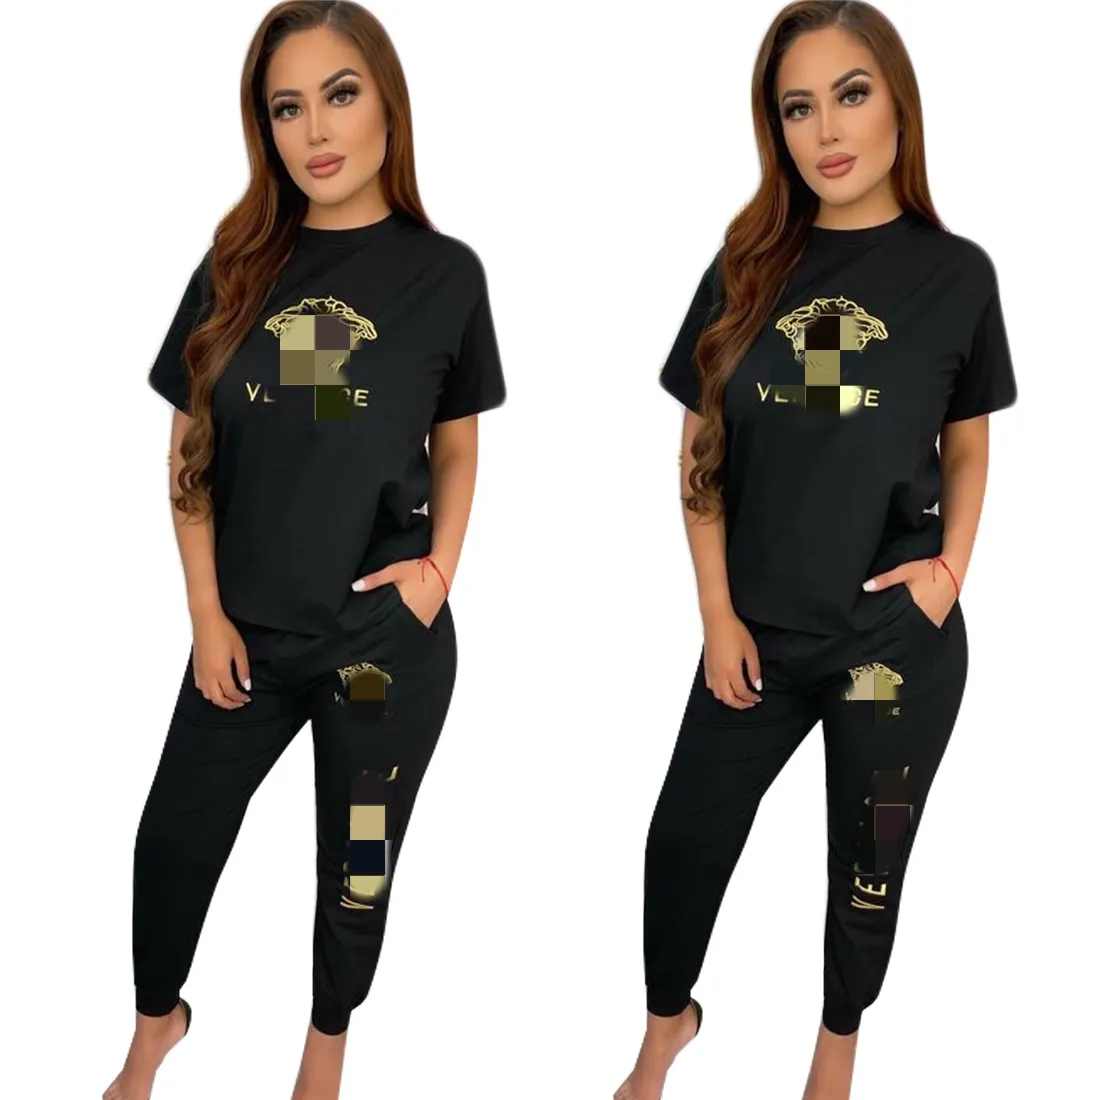 Embroidery Tracksuits Black Outfits Women Casual T-shirt and Sweatpants 2Pcs Set Free Ship